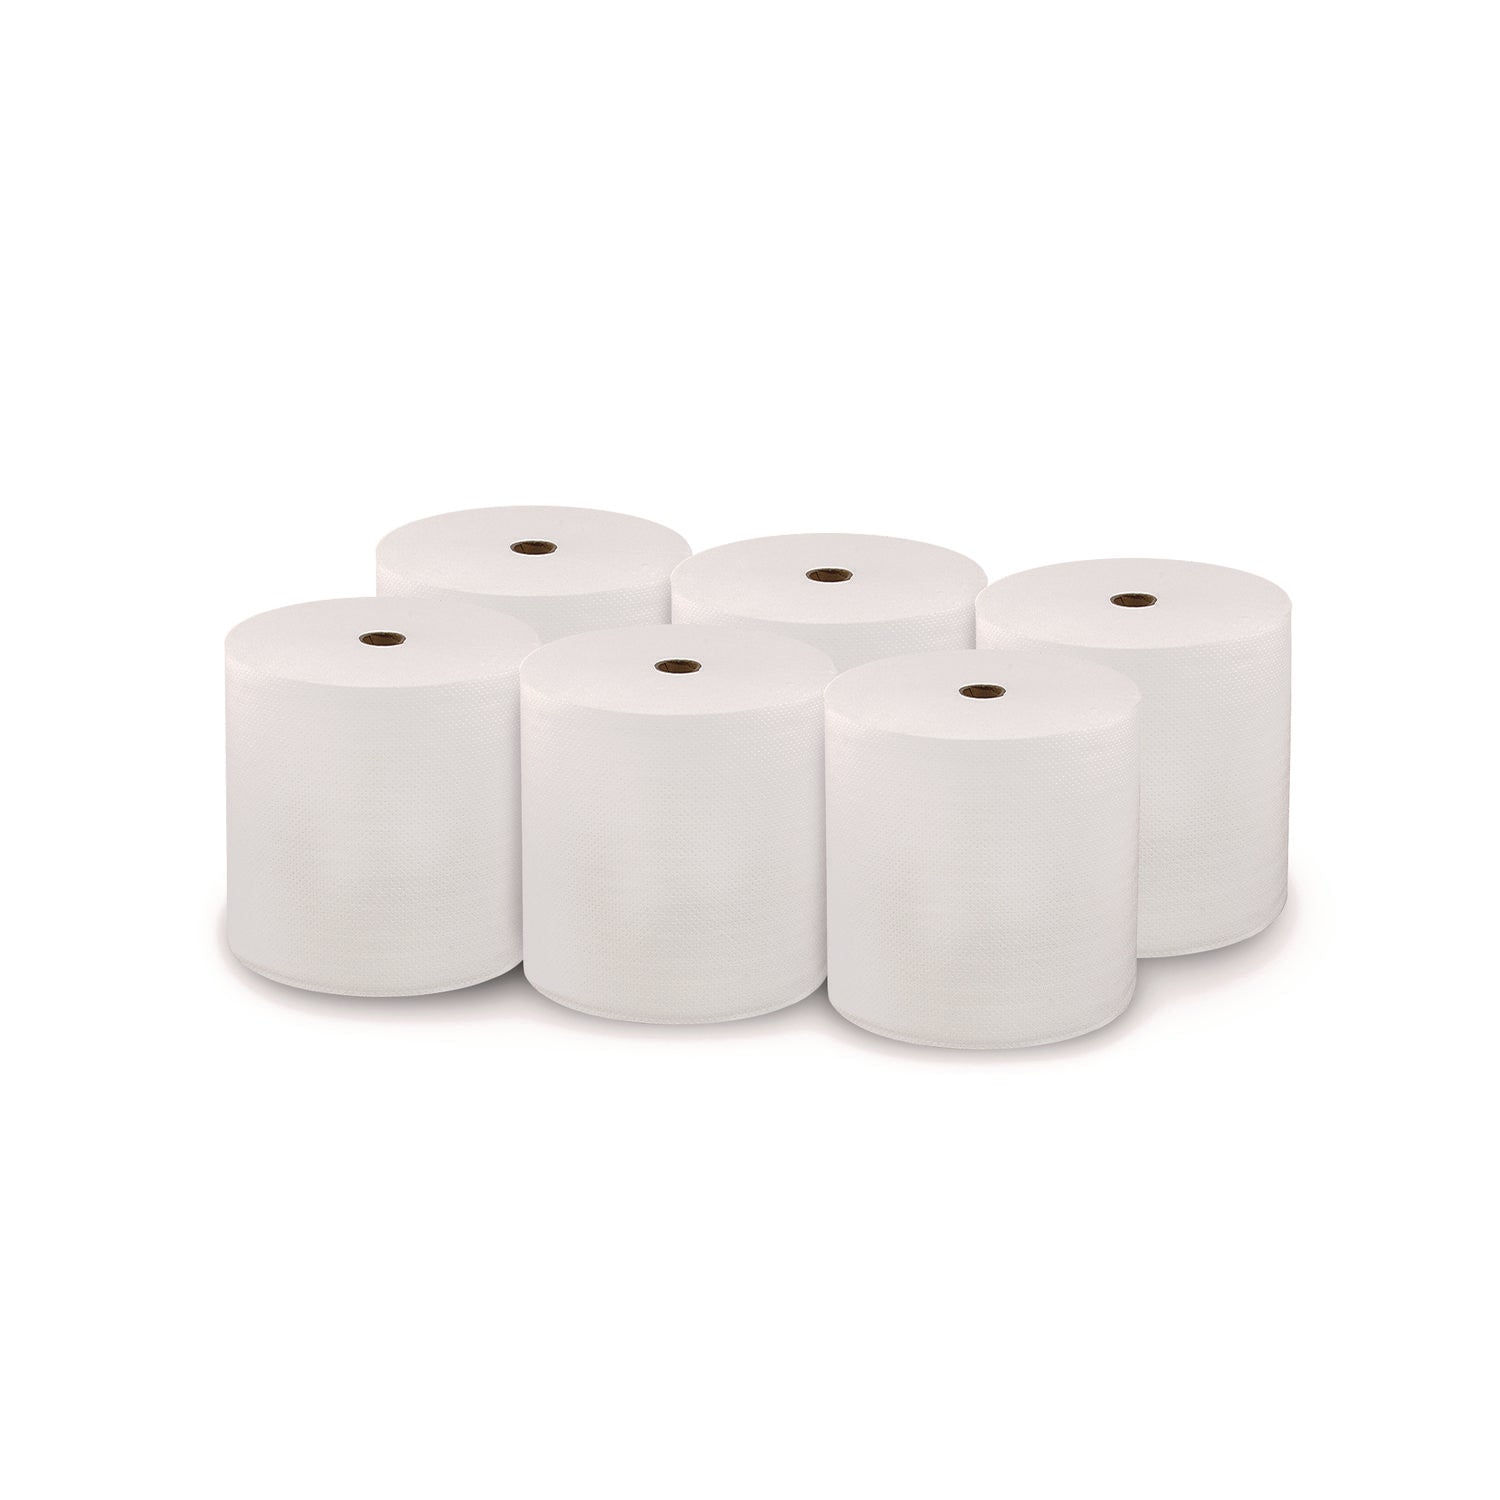 hard-wound-roll-towel-1-ply-7-x-1000-ft-white-6-rolls-carton_sol46902 - 3